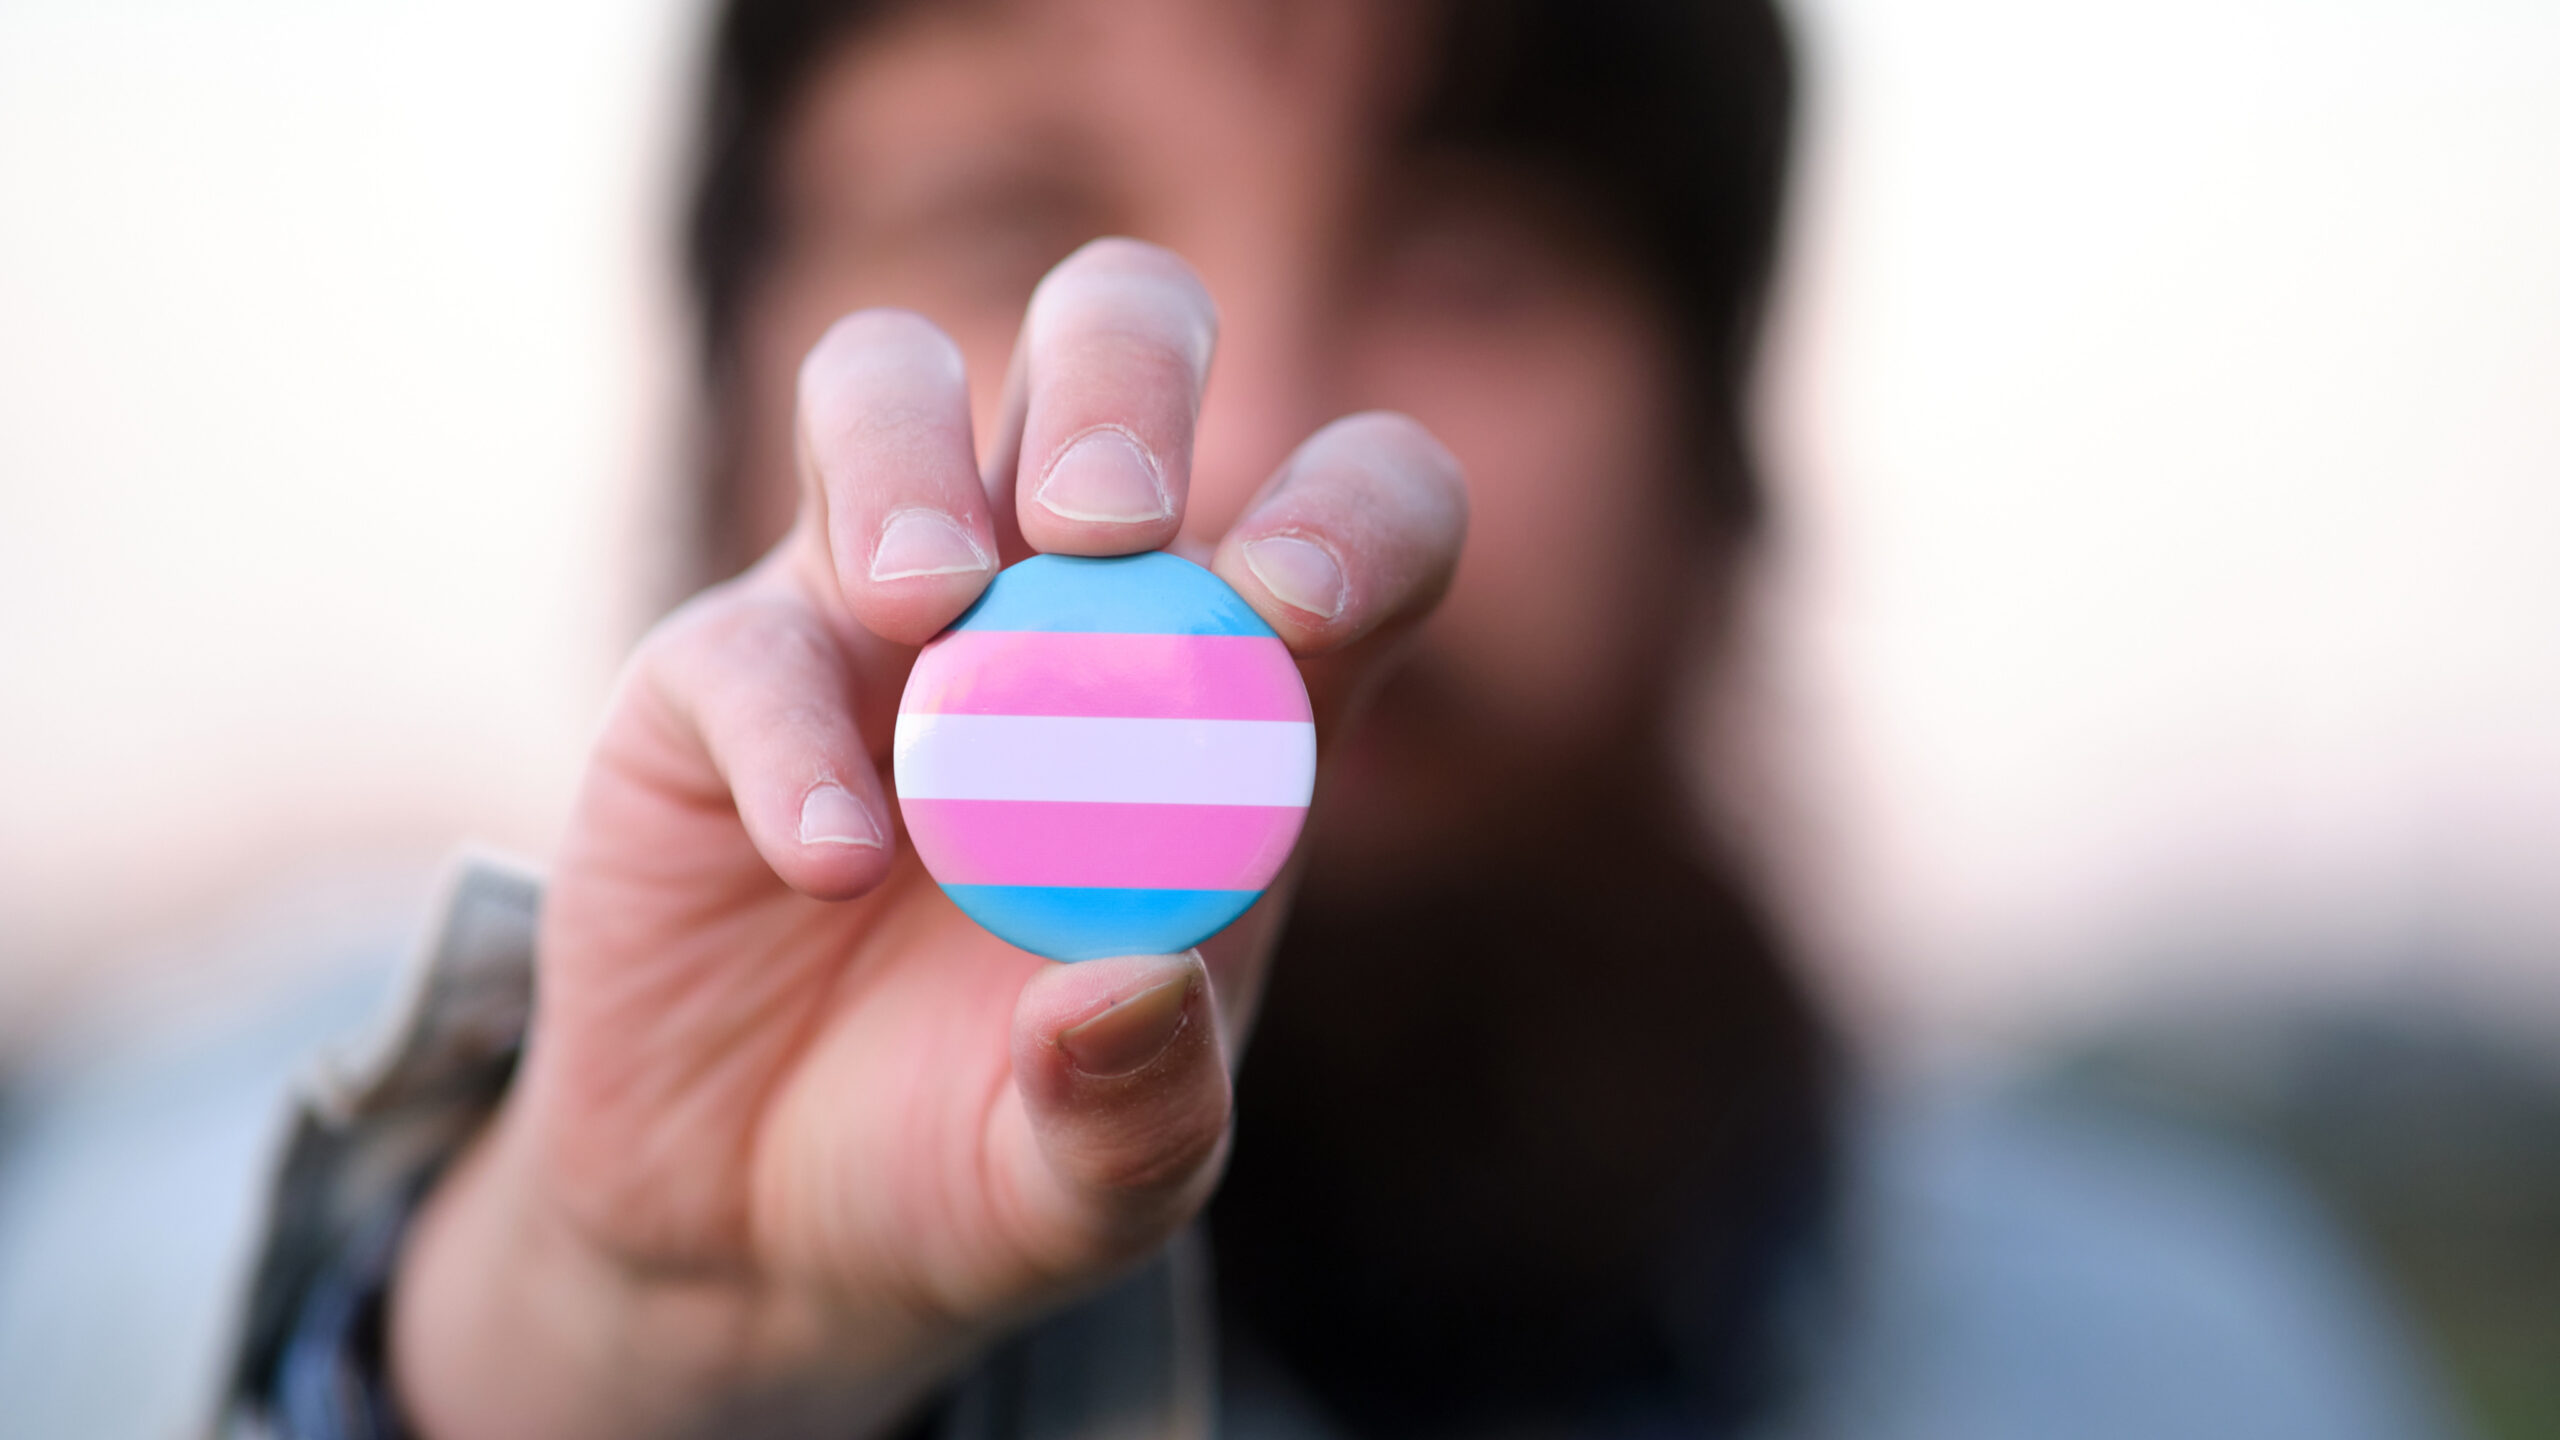 Lawsuit claims Trans-Identifying Man Could Be First Male President of Sorority